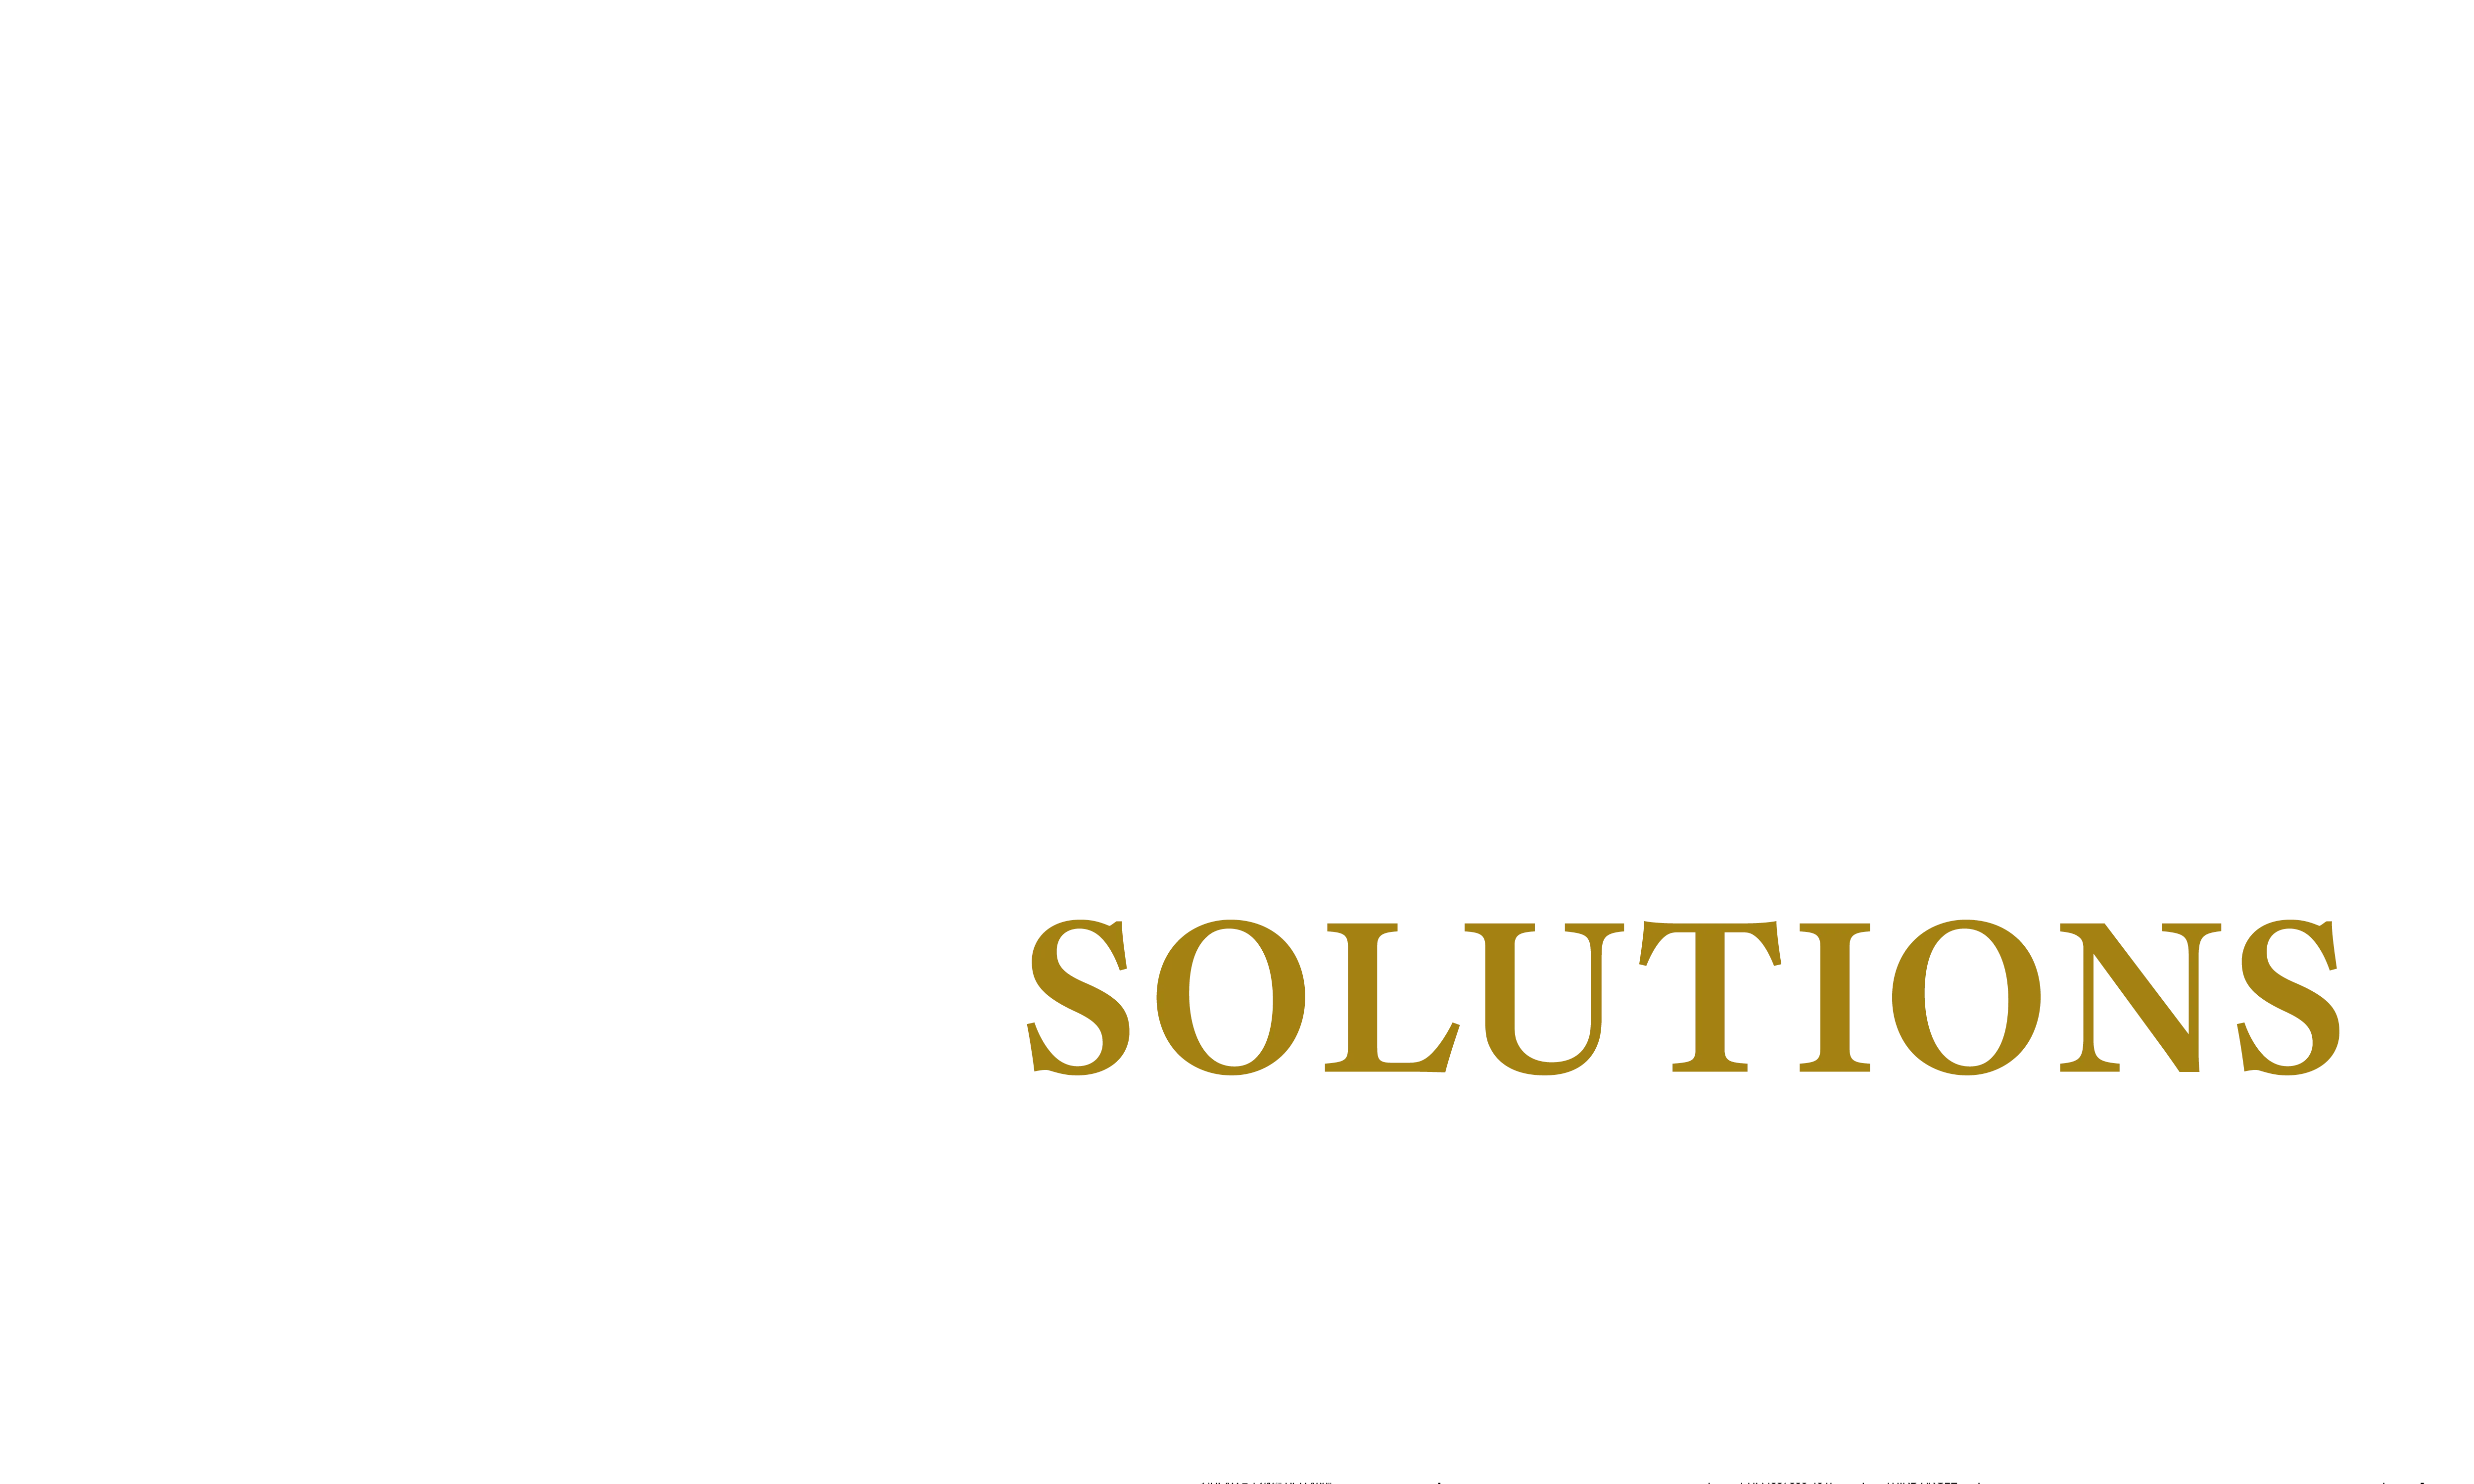 prairie solutions logo, depicting draft sketch of wheat incorporating a PS on it.